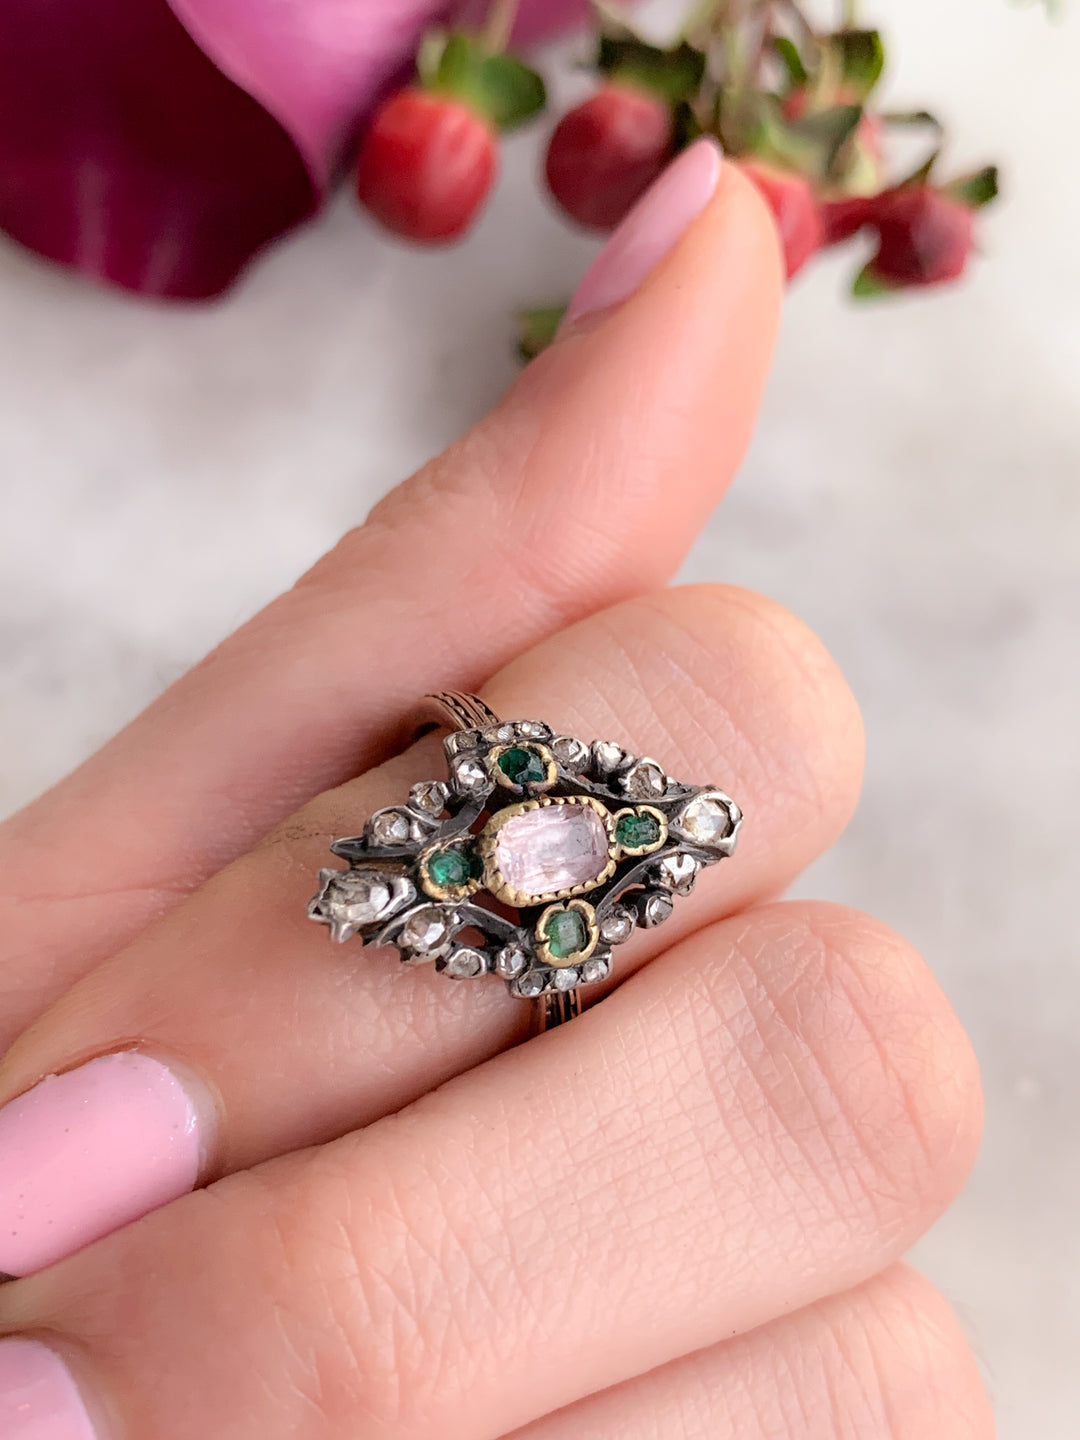 19th Century French Gemset Ring with Amethyst, Diamonds, and Emeralds